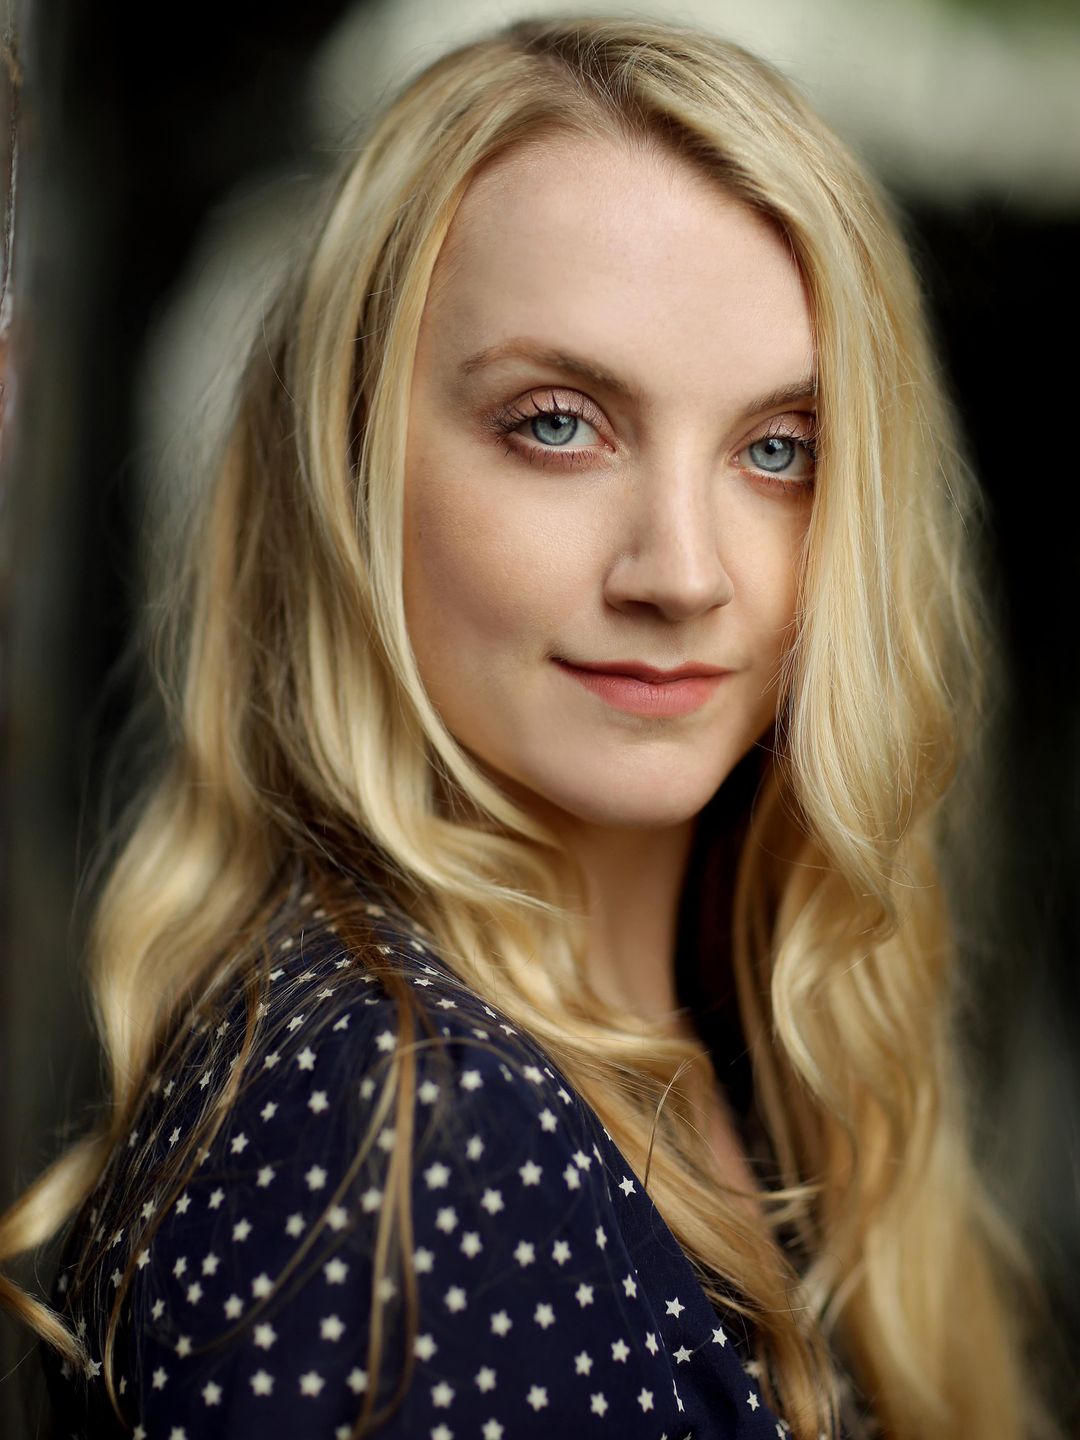 Evanna Lynch young age